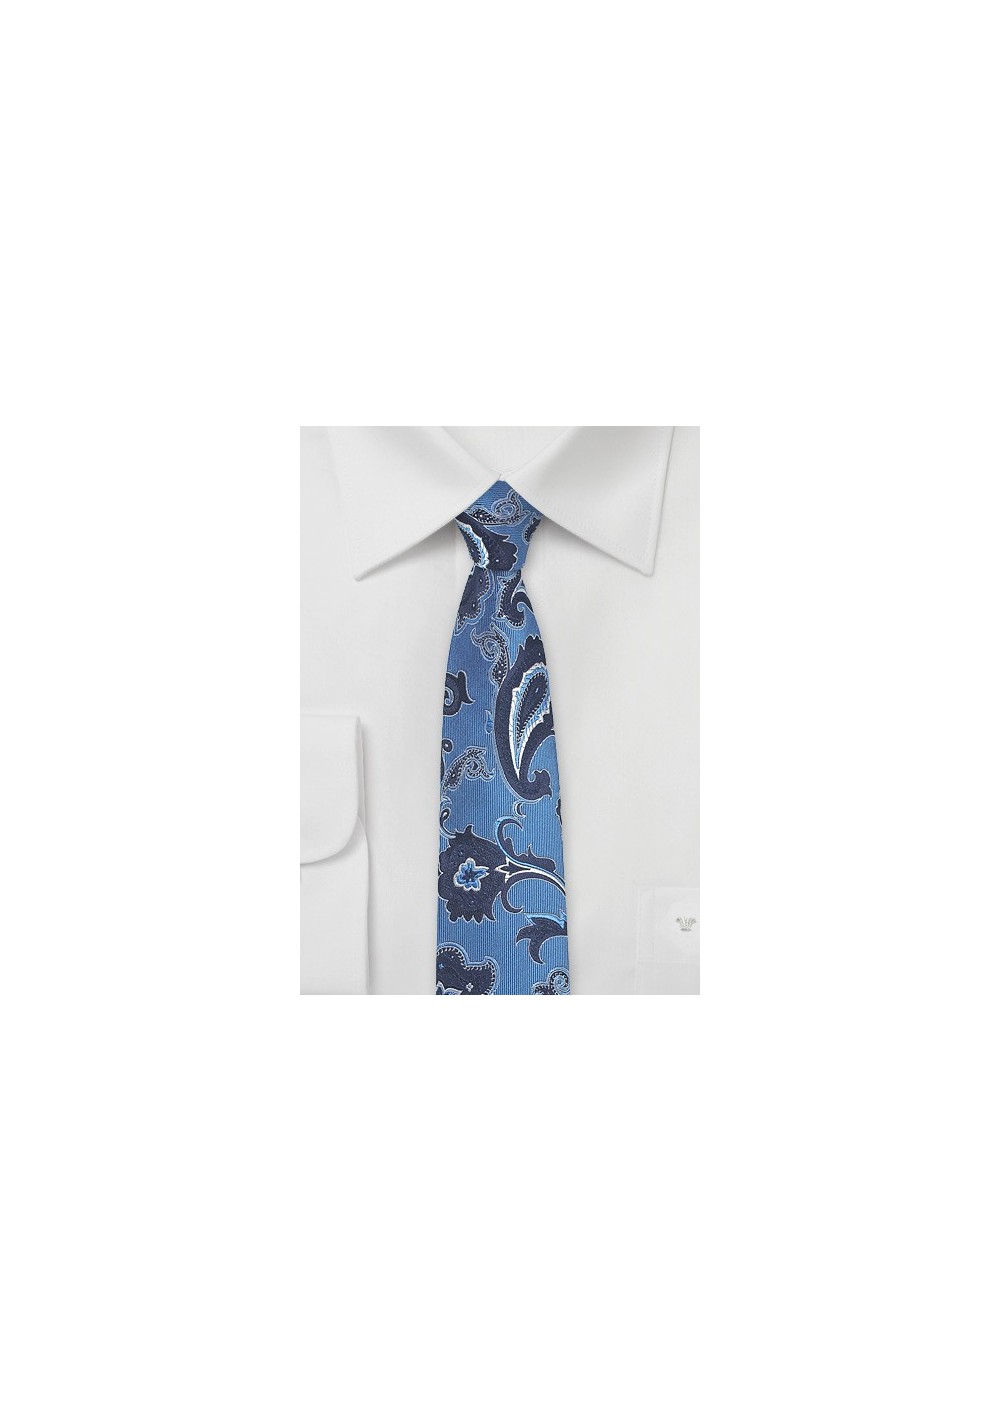 Trendy Paisley Tie in Blue and Navy